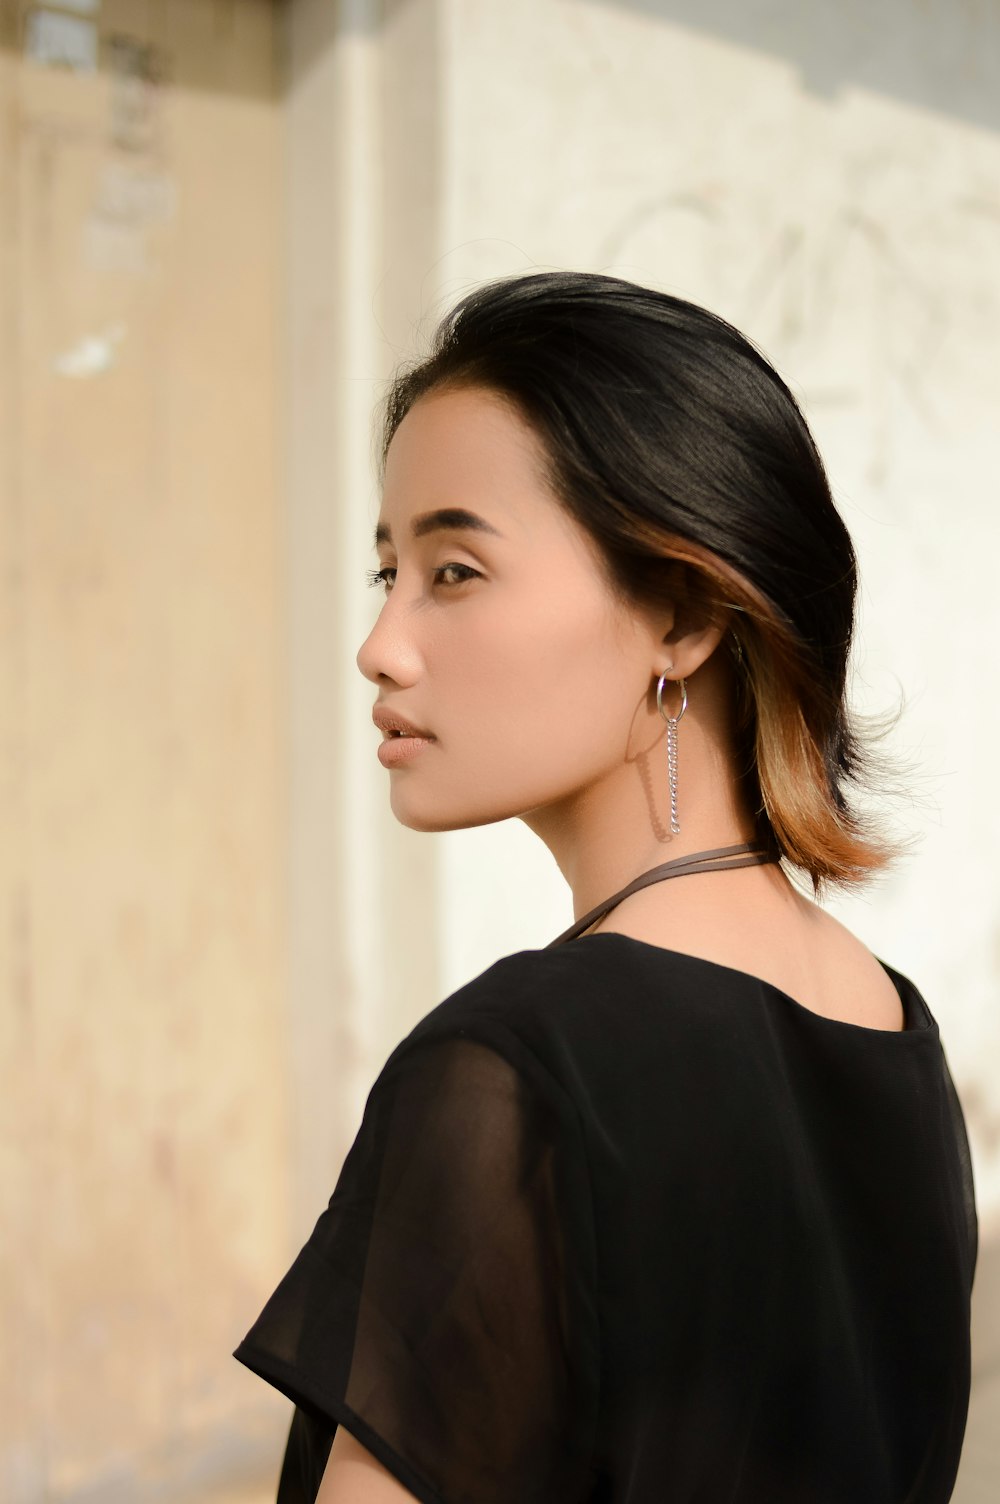 a woman wearing a black top and earrings